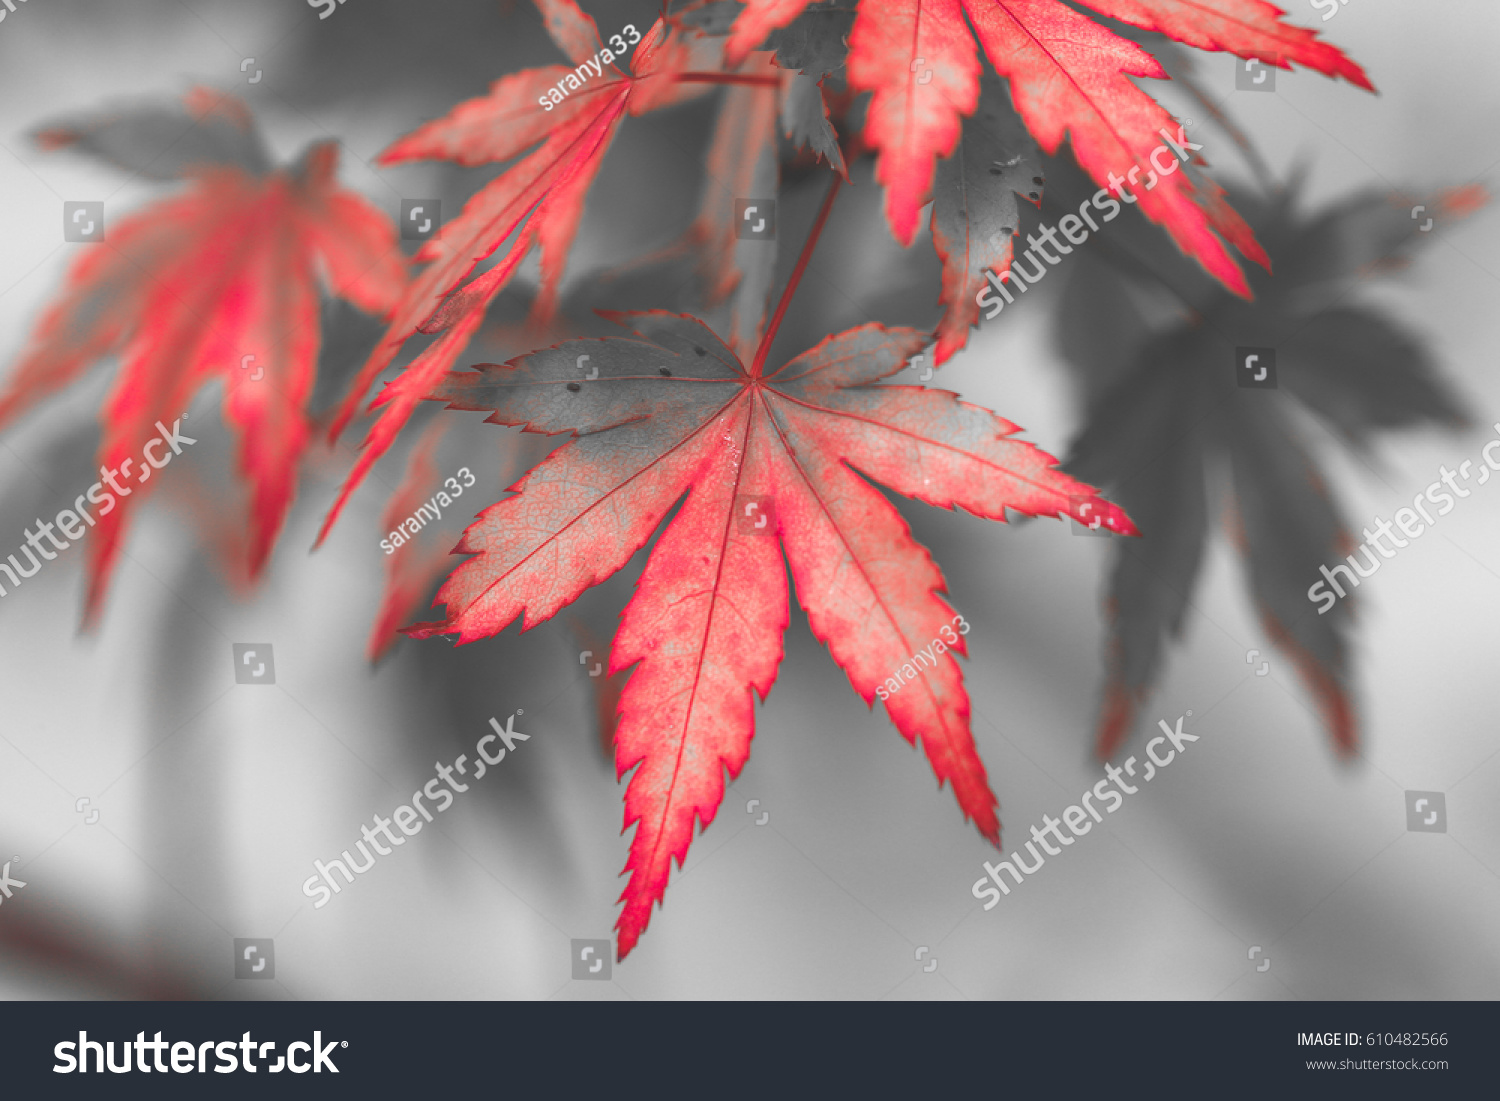 Red leaves in autumn season change #610482566